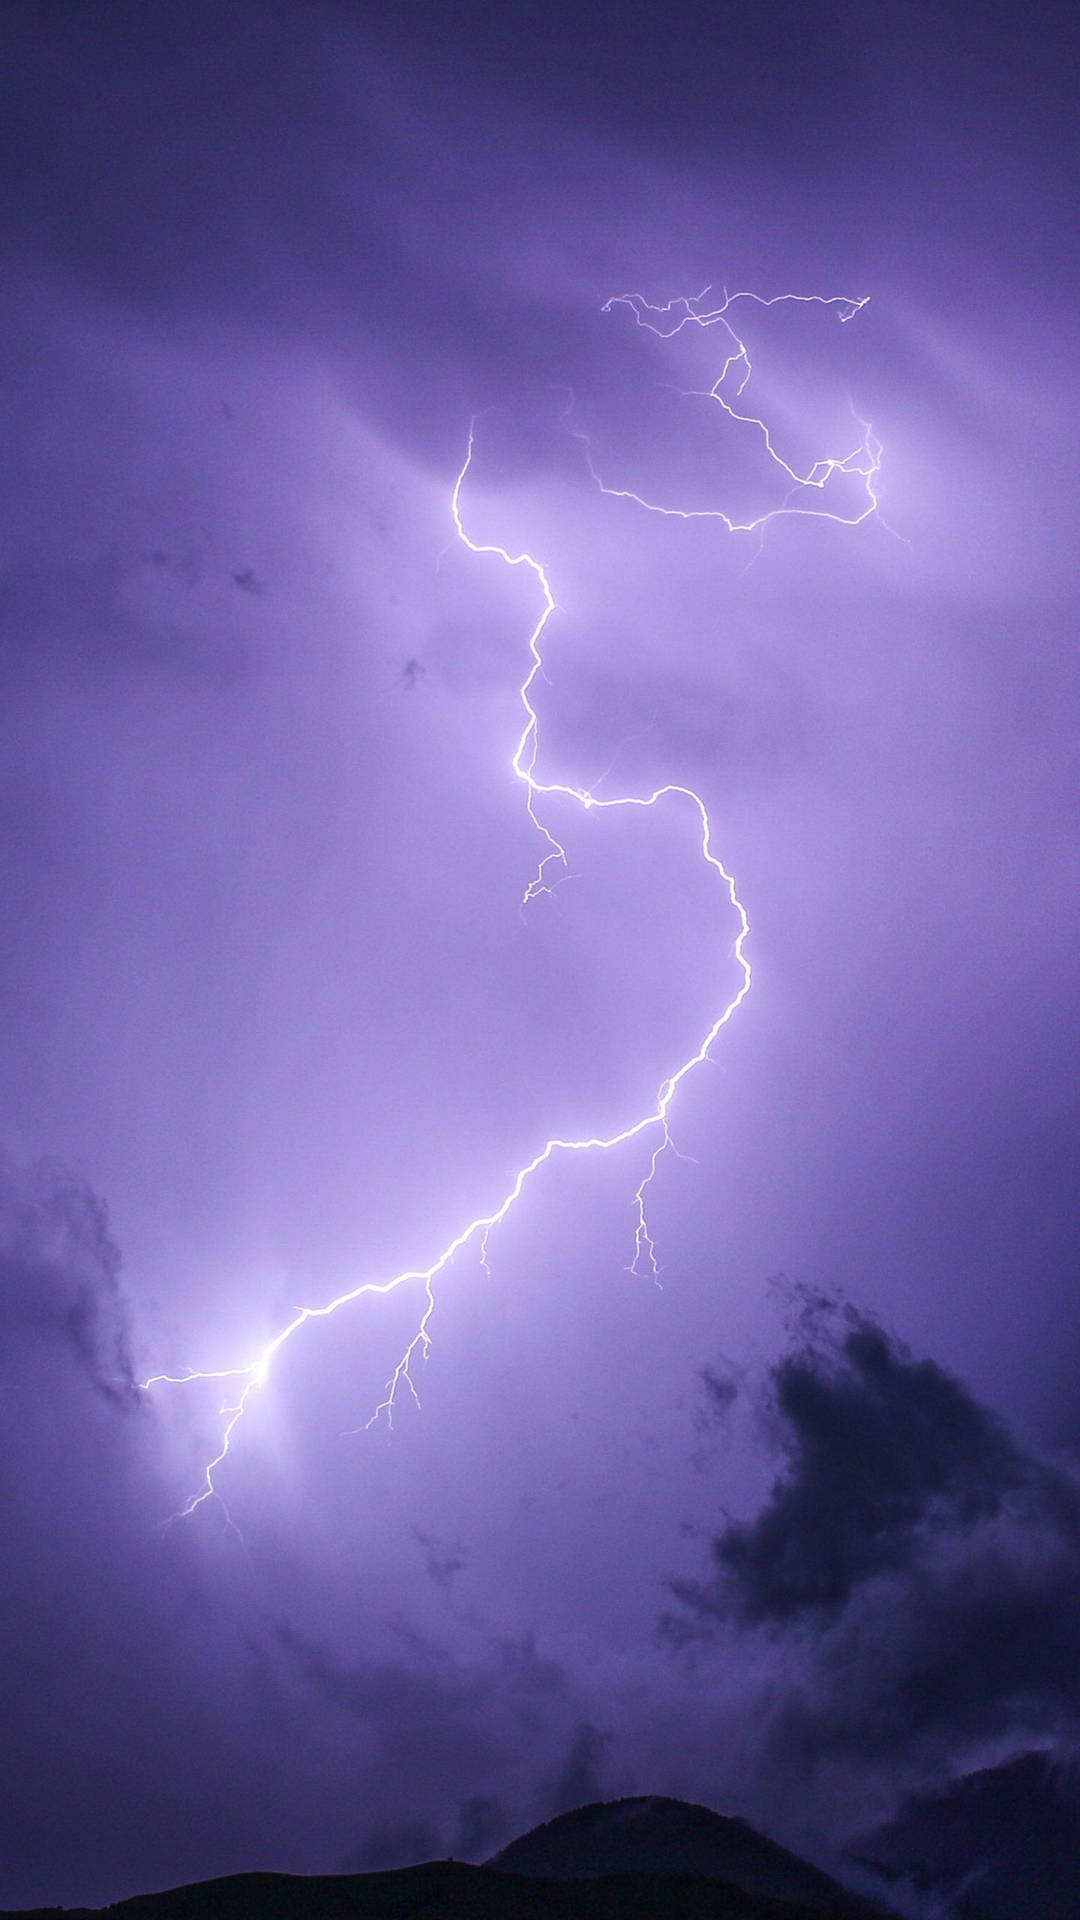 Lightning Strikes Over A Purple Sky With Clouds Wallpaper